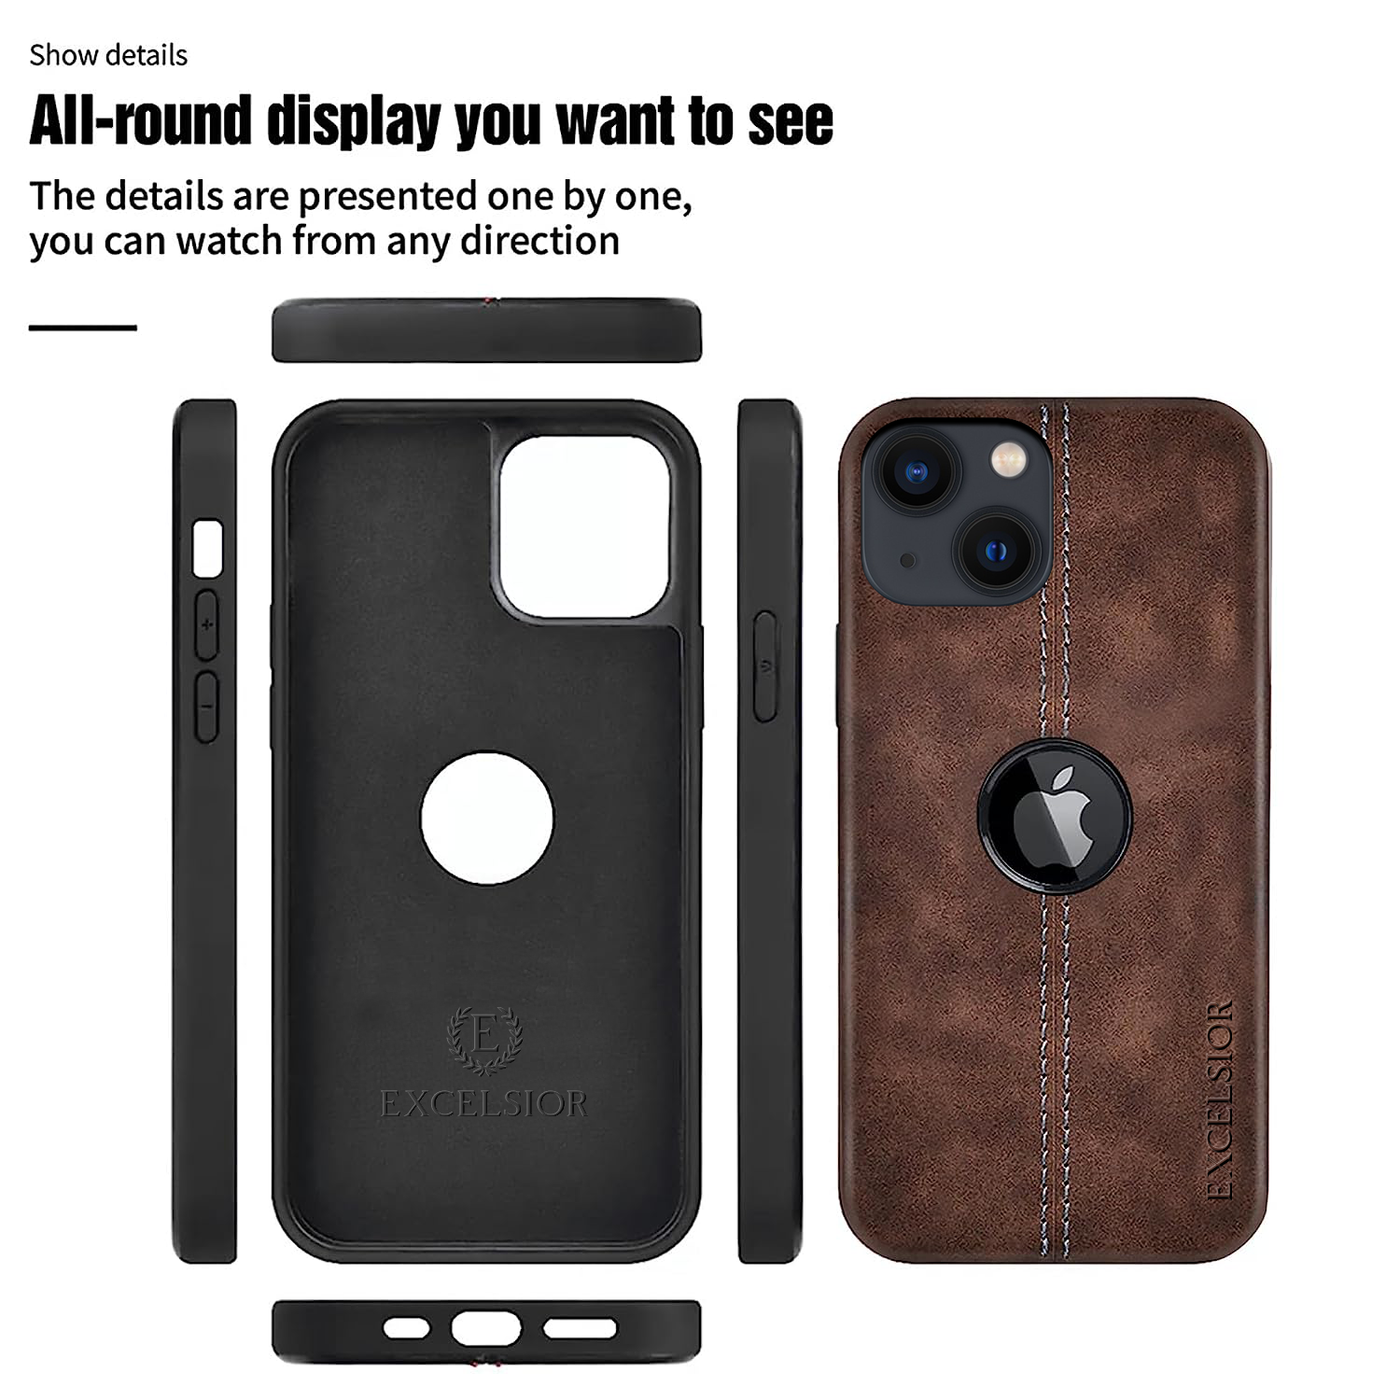 Excelsior Premium Retro PU Leather Back Cover case For Apple iPhone 14